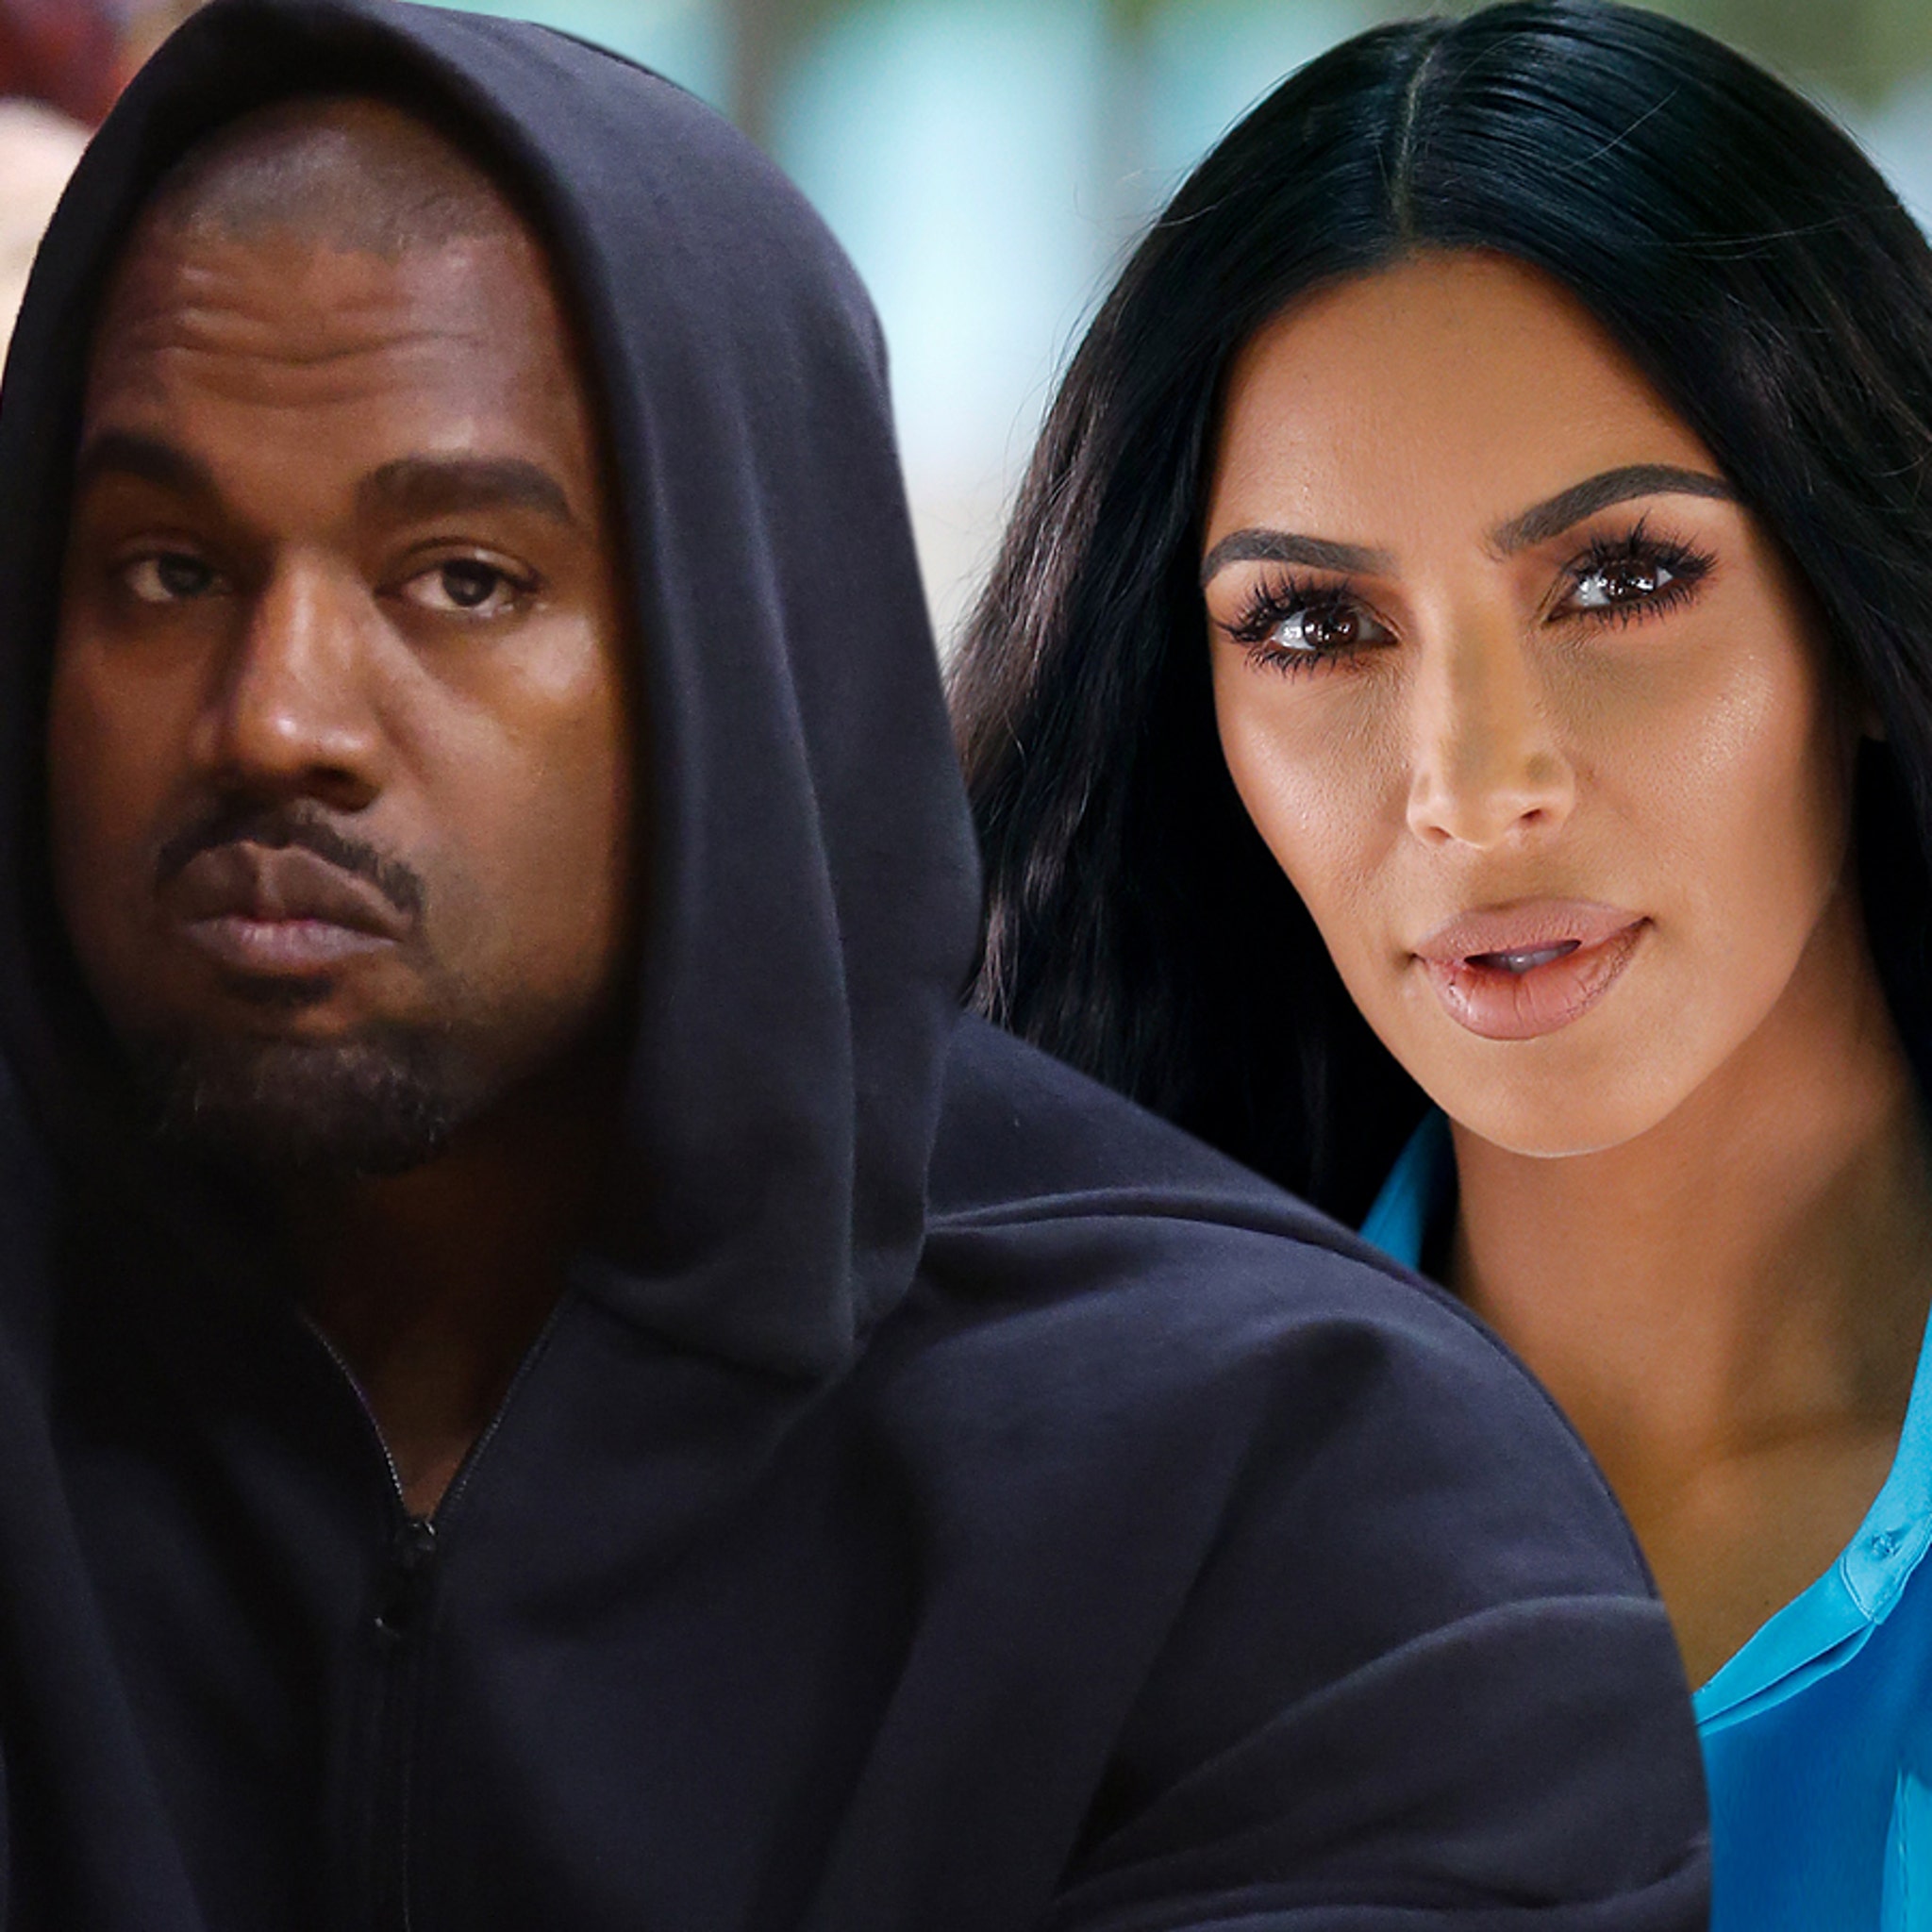 Kim Kardashian and Kanye West On The New “Dash” Store – Your Next